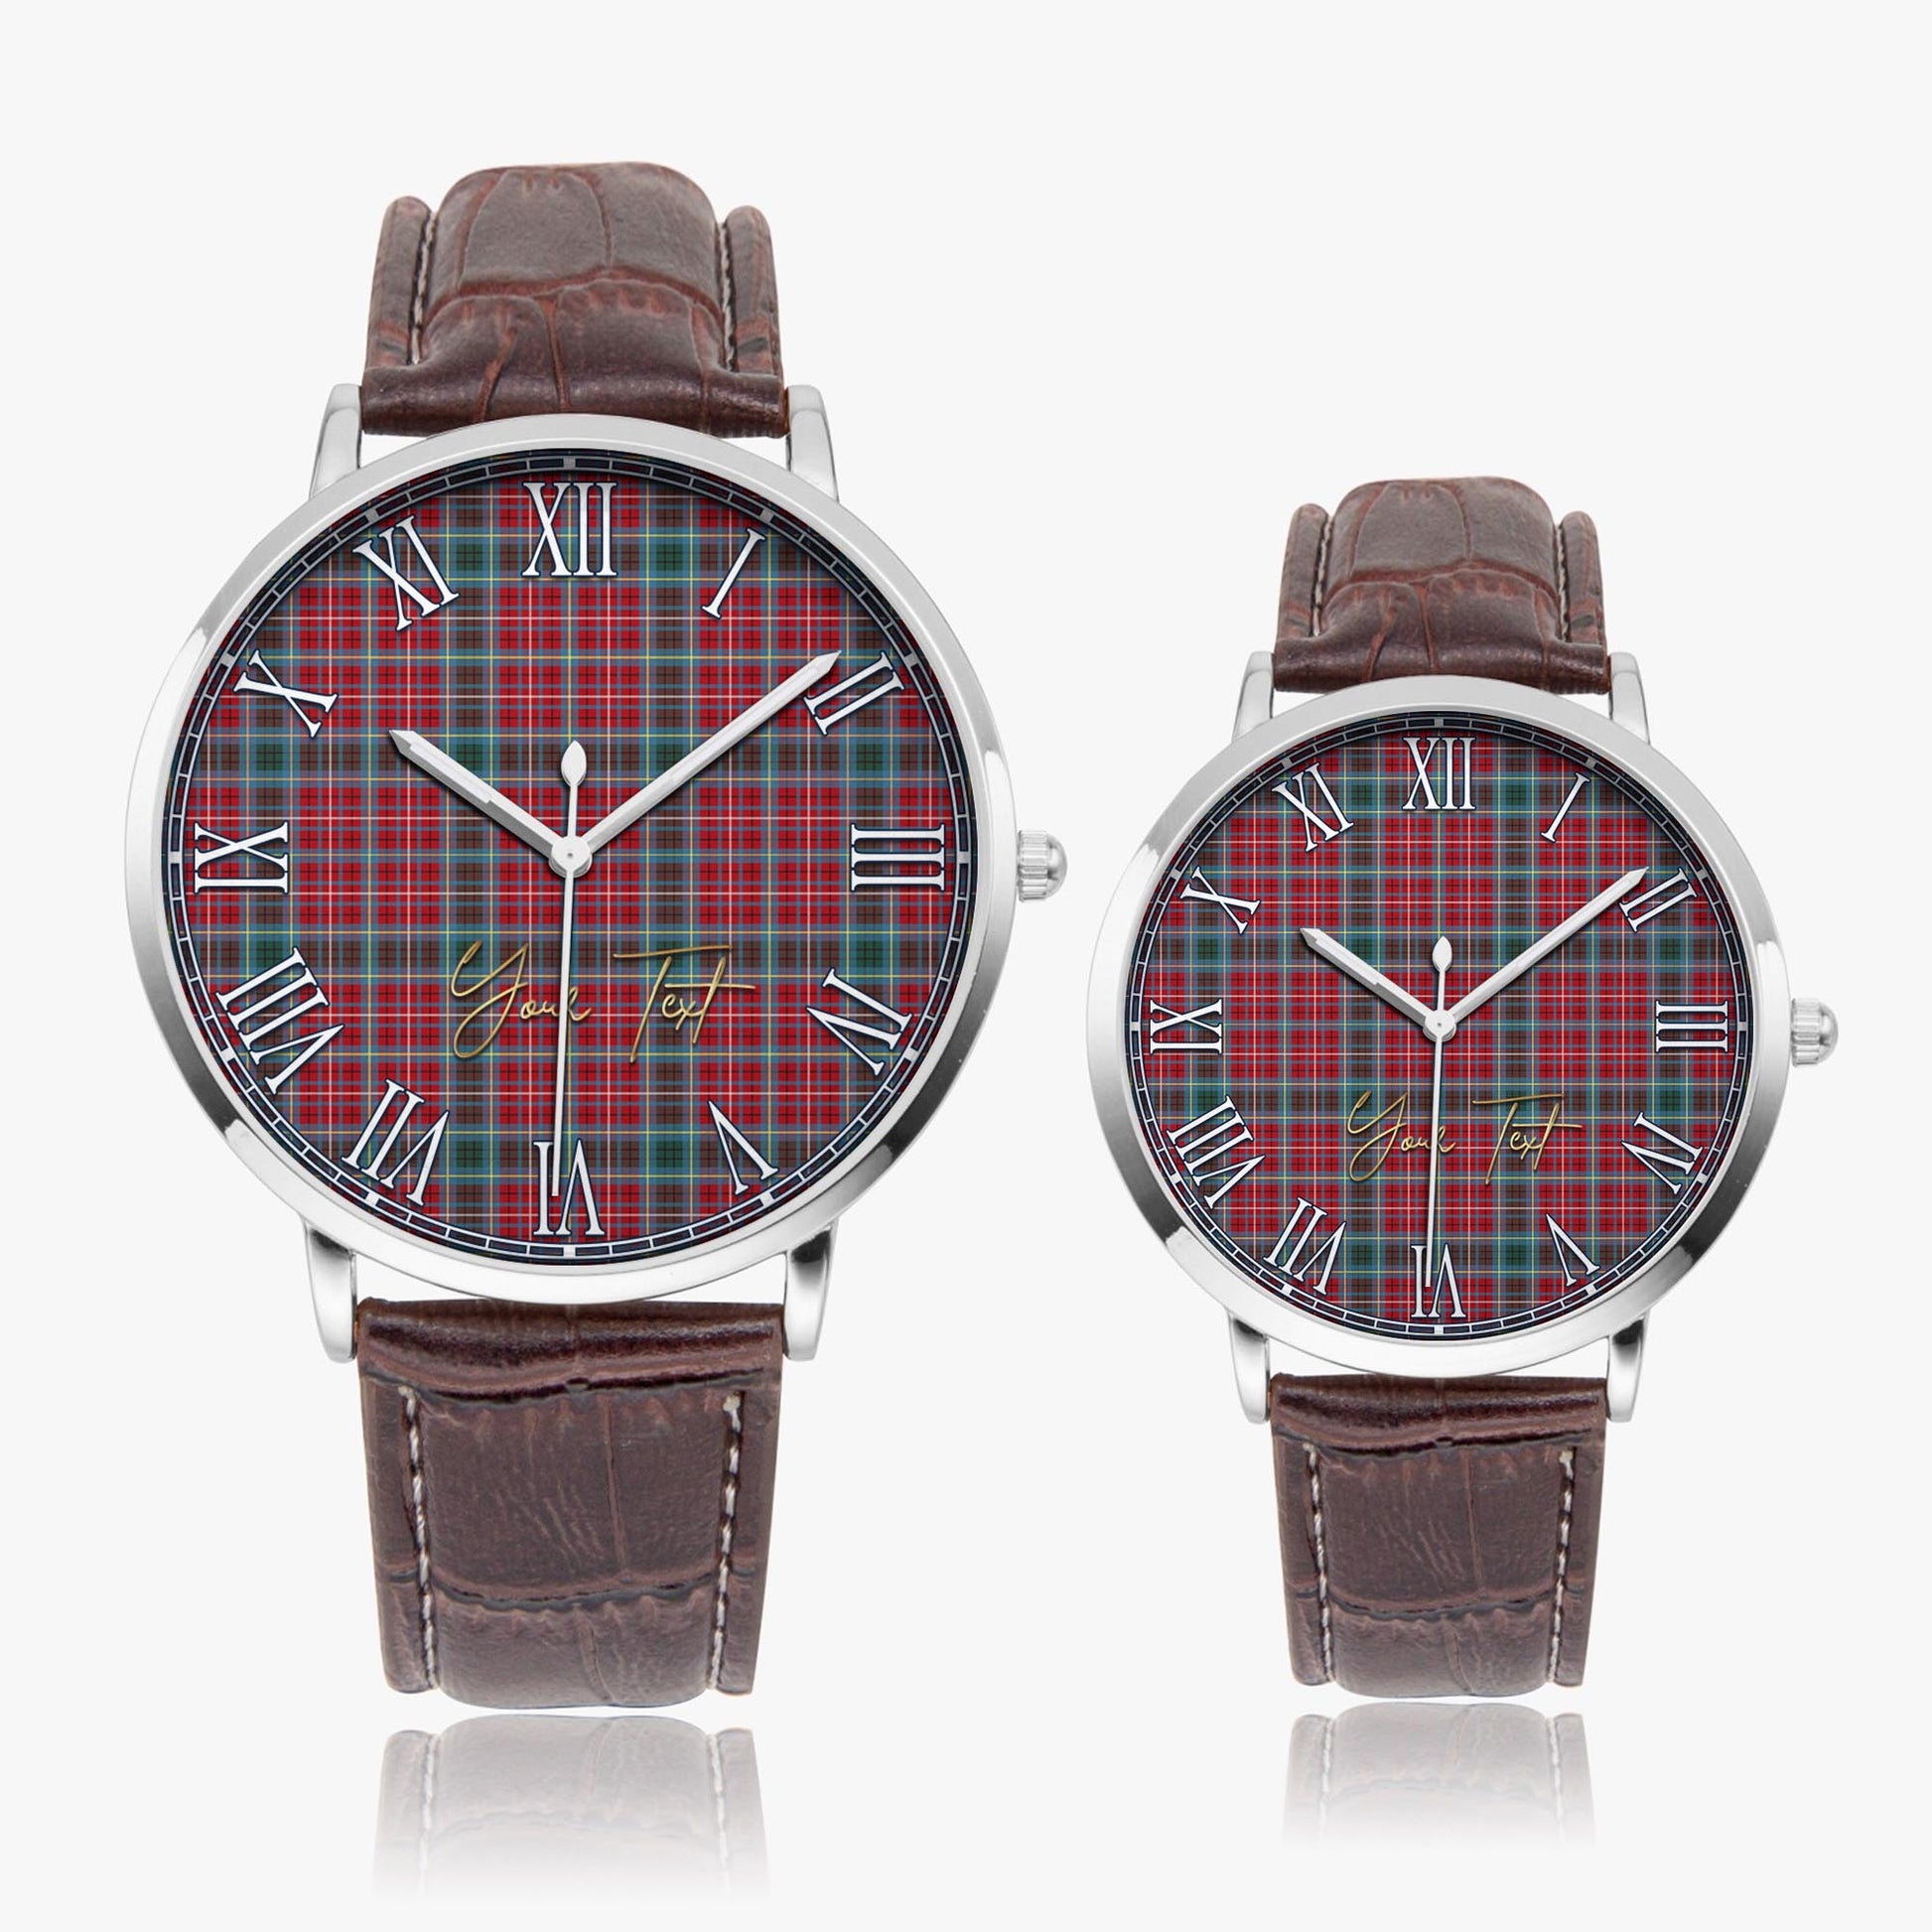 British Columbia Province Canada Tartan Personalized Your Text Leather Trap Quartz Watch Ultra Thin Silver Case With Brown Leather Strap - Tartanvibesclothing